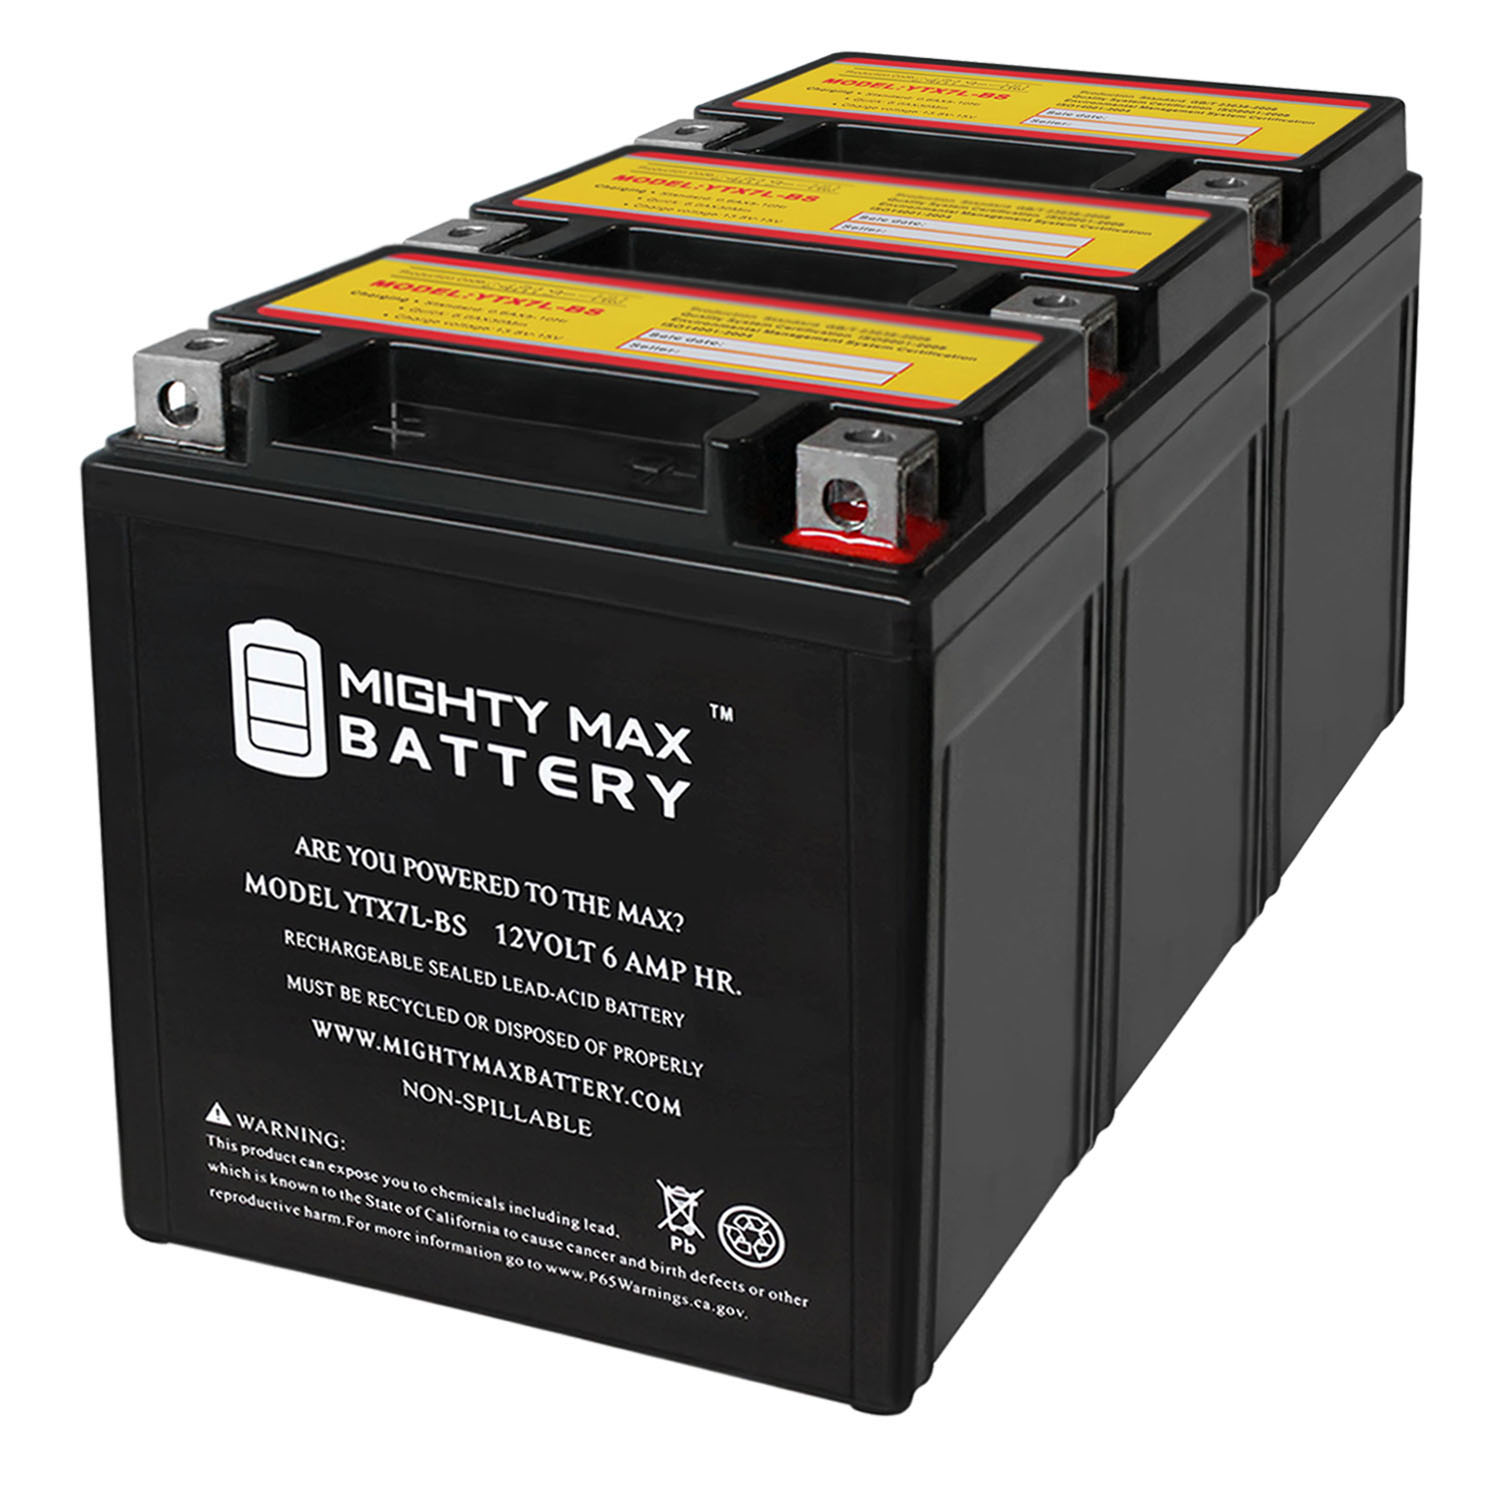 YTX7L-BS 12v 6Ah Replacement Battery compatible with KTM 125 Duke 2013 - 3 Pack